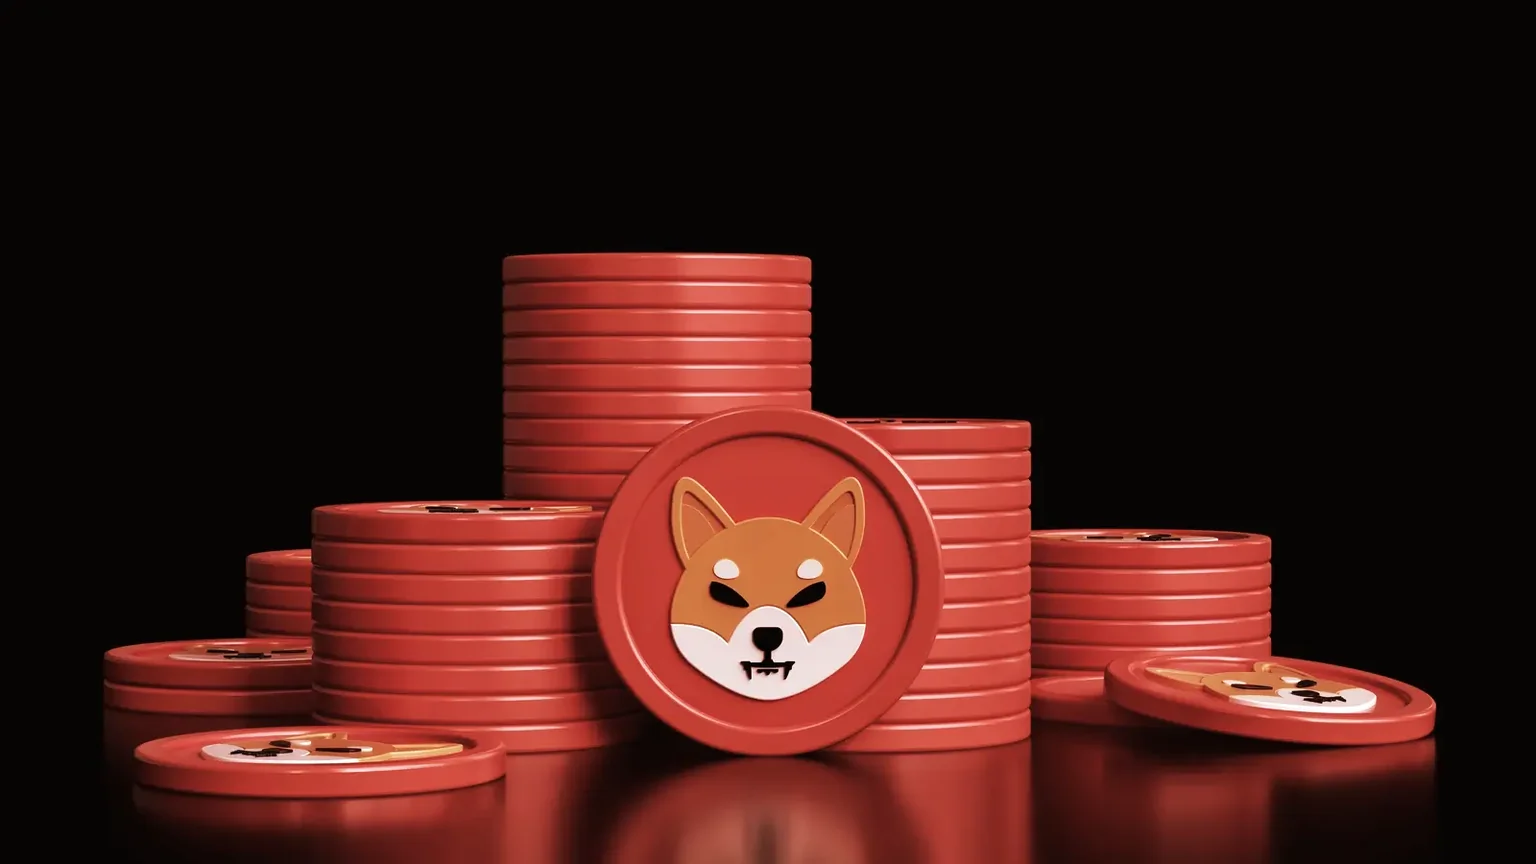 Shiba Inu is one of the most valuable meme coins on the market. Image: Shutterstock